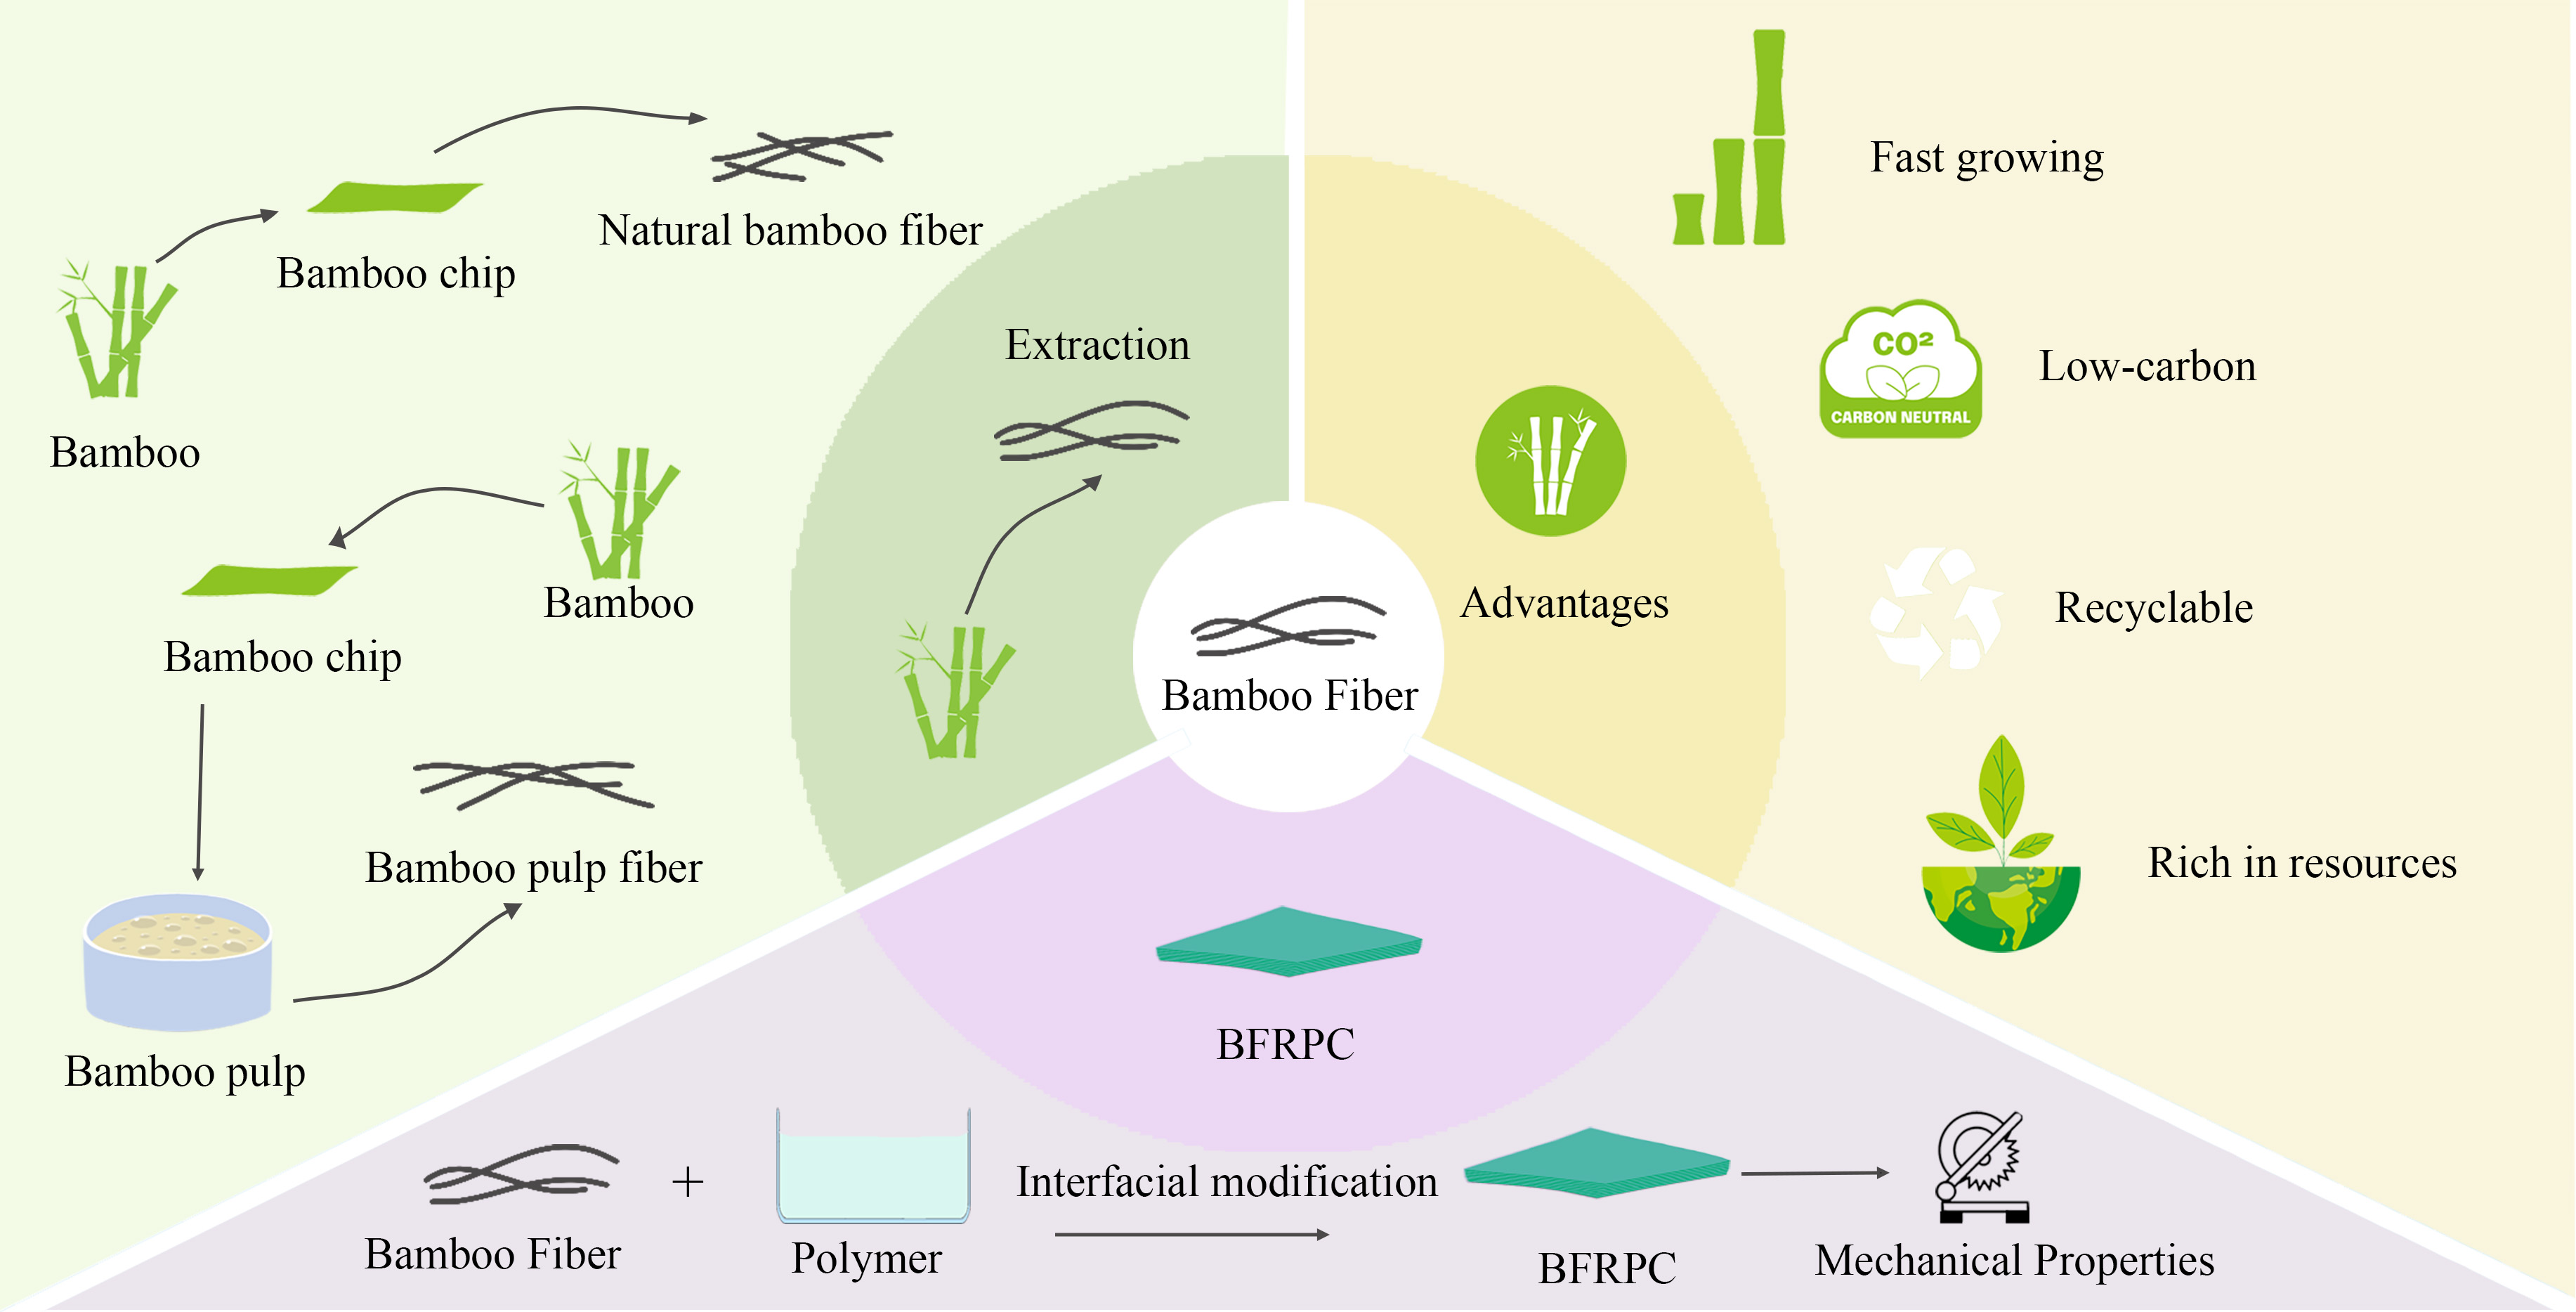 Performance and development challenges of micro–small bamboo